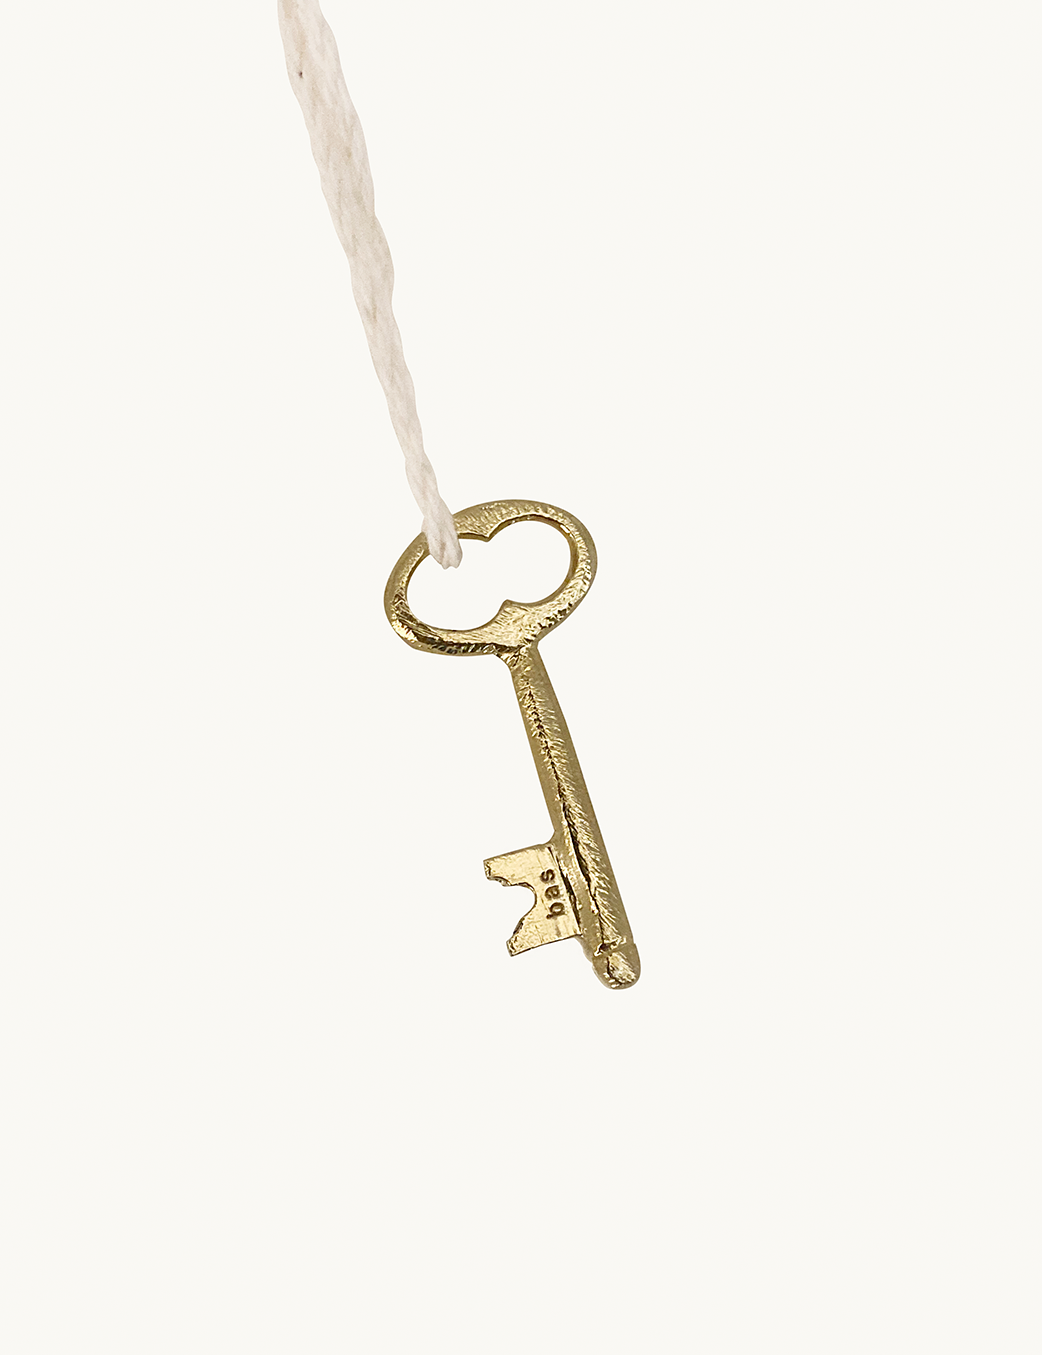 Your Key